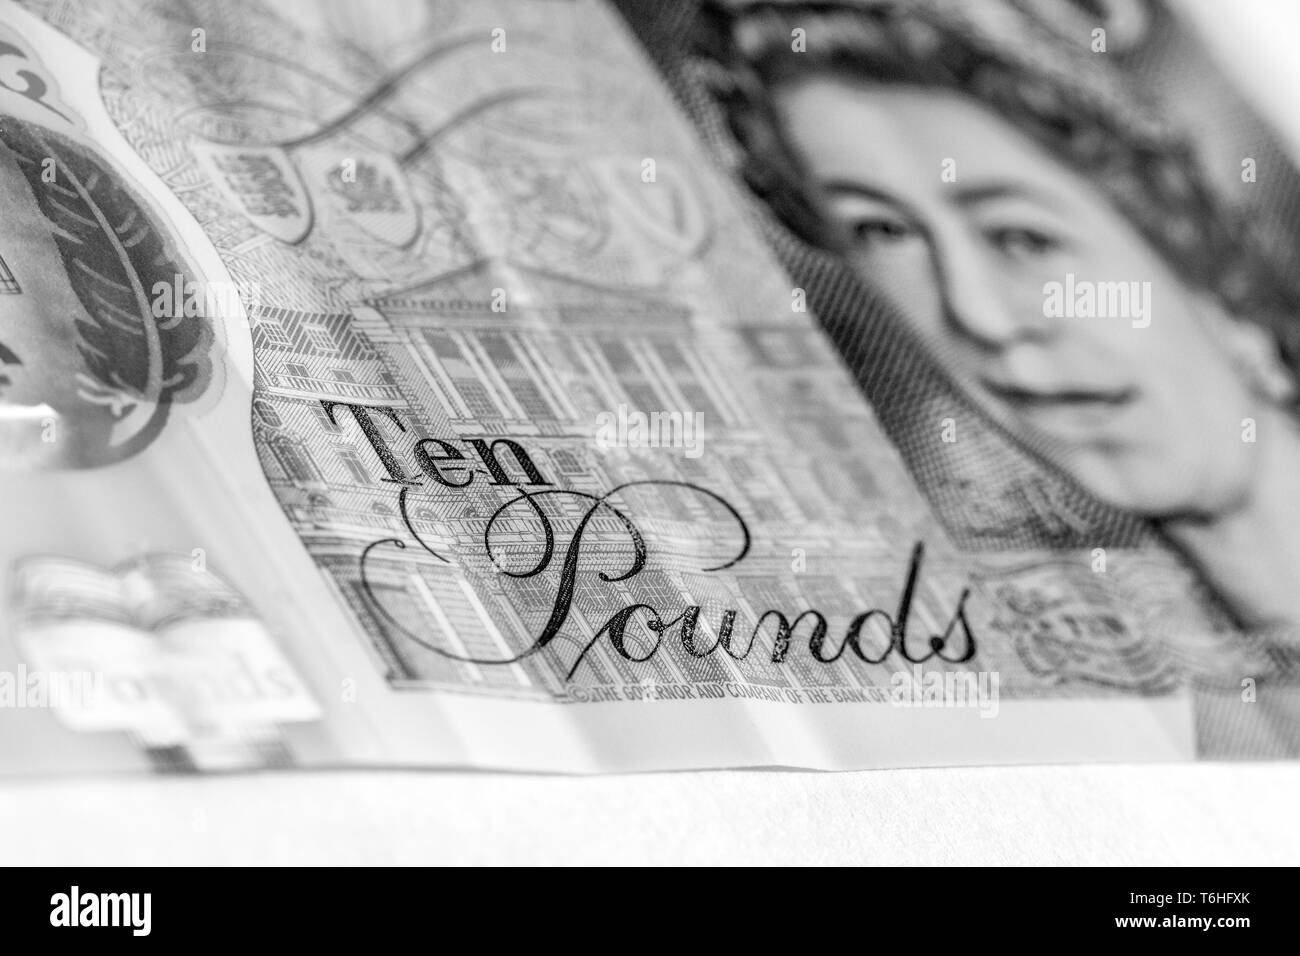 Close-up, macro photo of a piece of £10 banknote. Ten pounds sterling. Portrait of Queen Elizabeth II Stock Photo